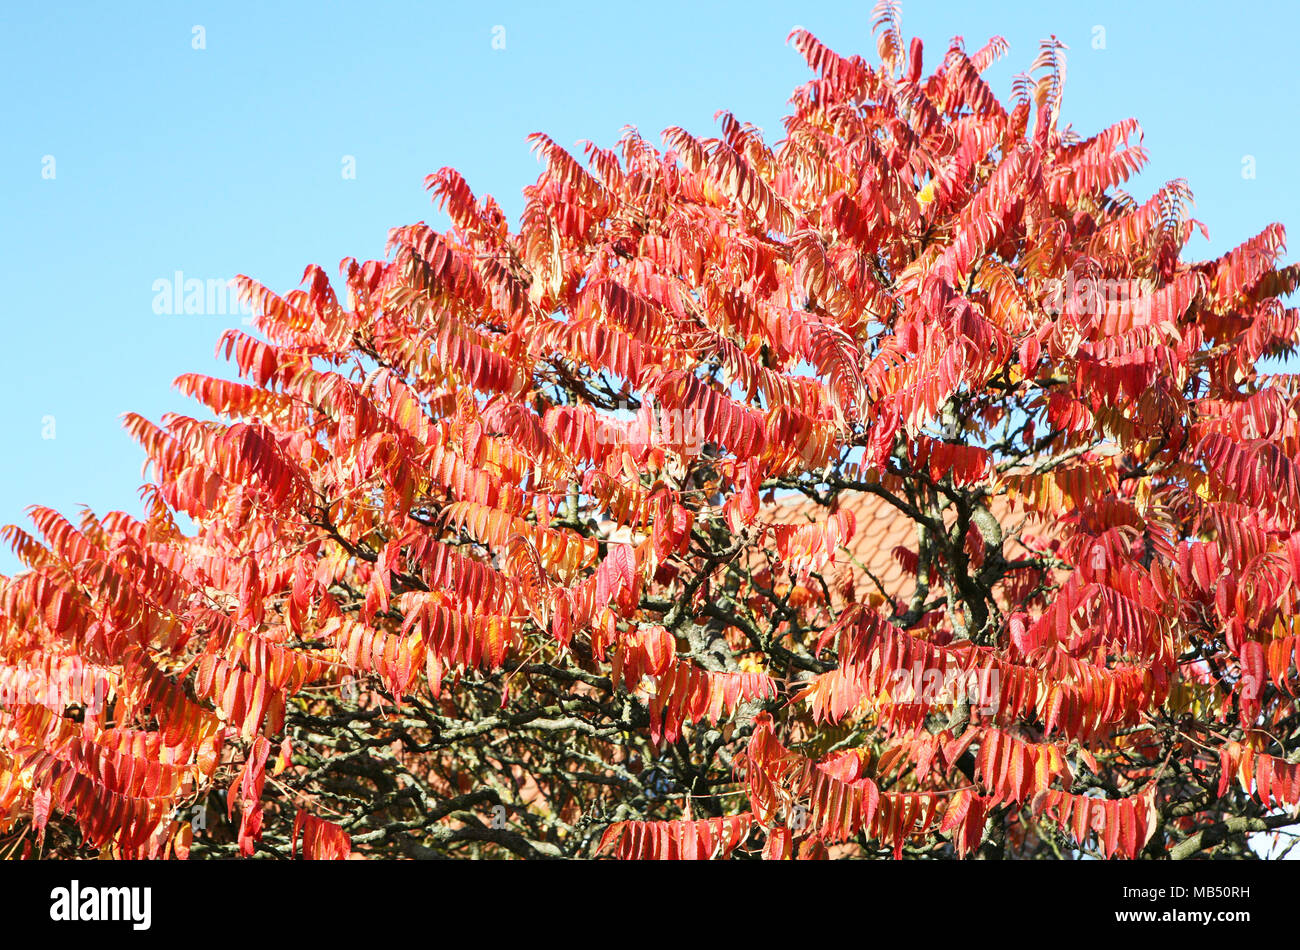 Red leaves tree branches on a blue sky Stock Photo